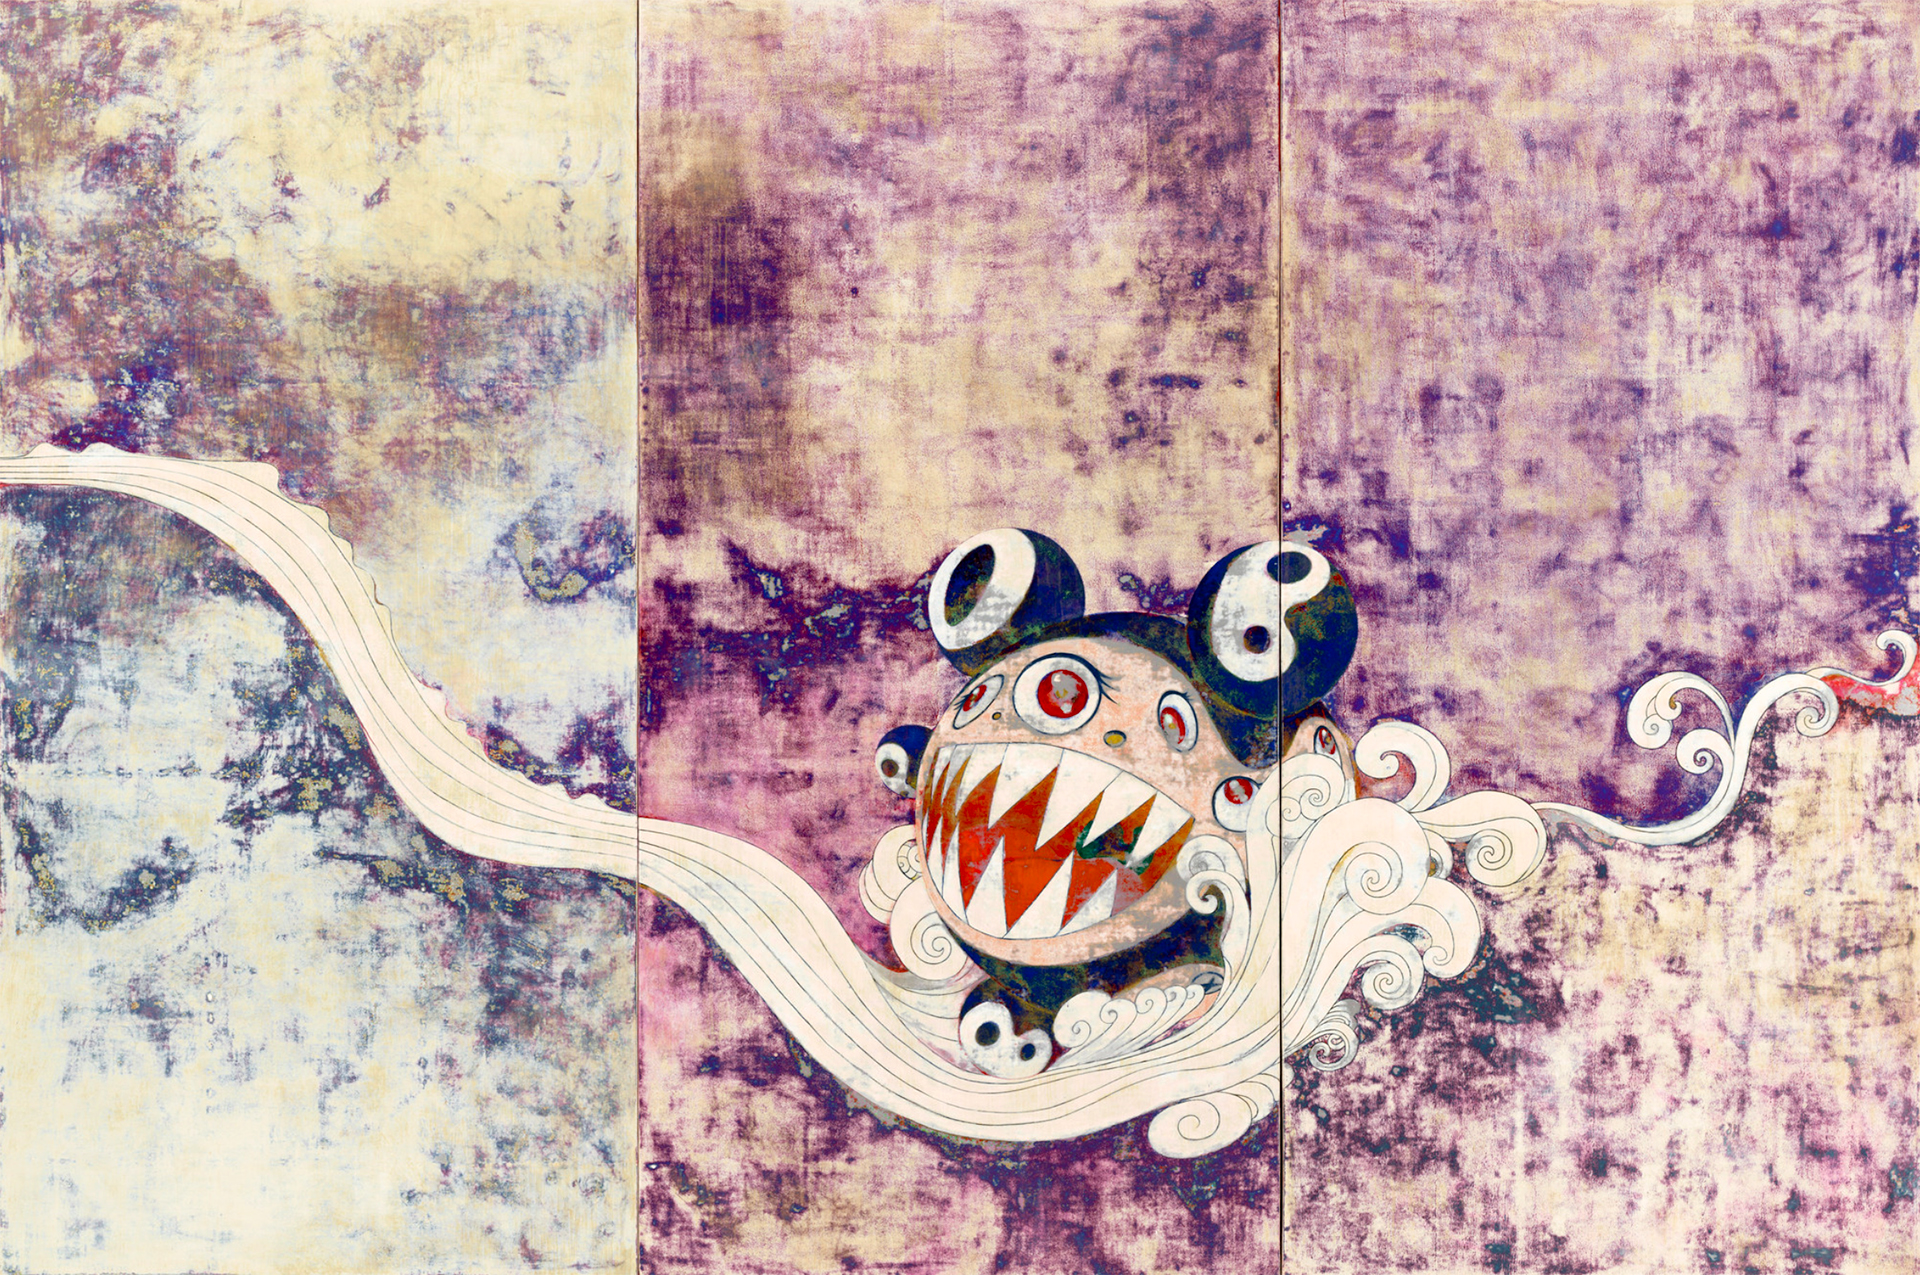 Artwork titled “727” by Takashi Murakami. The piece presents a vibrant triptych with a textured, multi-colored background that transitions from pastel blues to deep purples. Dominating the central panel is a whimsical, wide-eyed creature with pronounced fangs, large circular eyes, and an animated facial expression. The creature is intricately adorned with swirls and patterns, and it seems to emerge or float amidst a cascade of white, wave-like ribbons that gracefully flow through the composition.